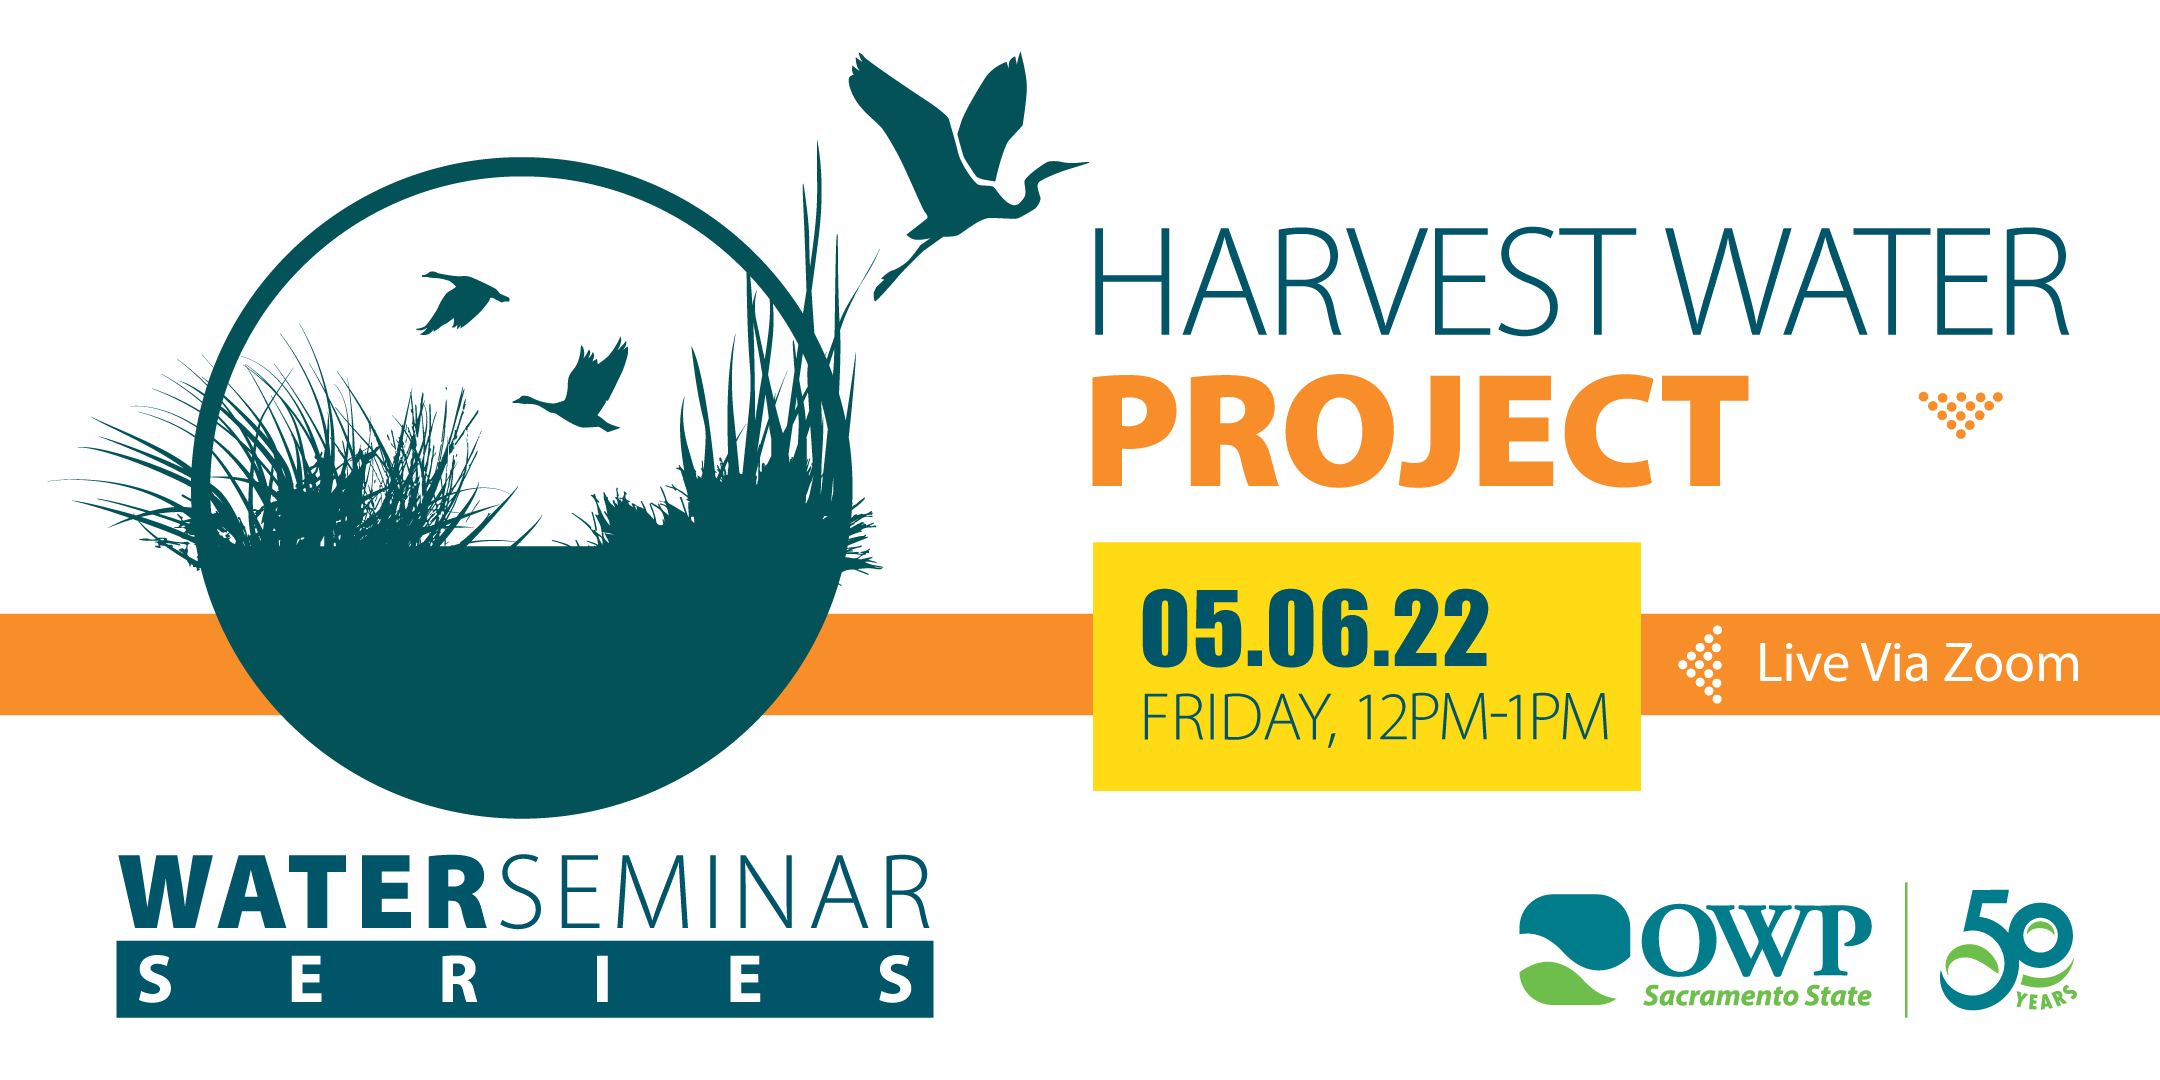 Water Seminar May 6, 2022, Harvest Water Project